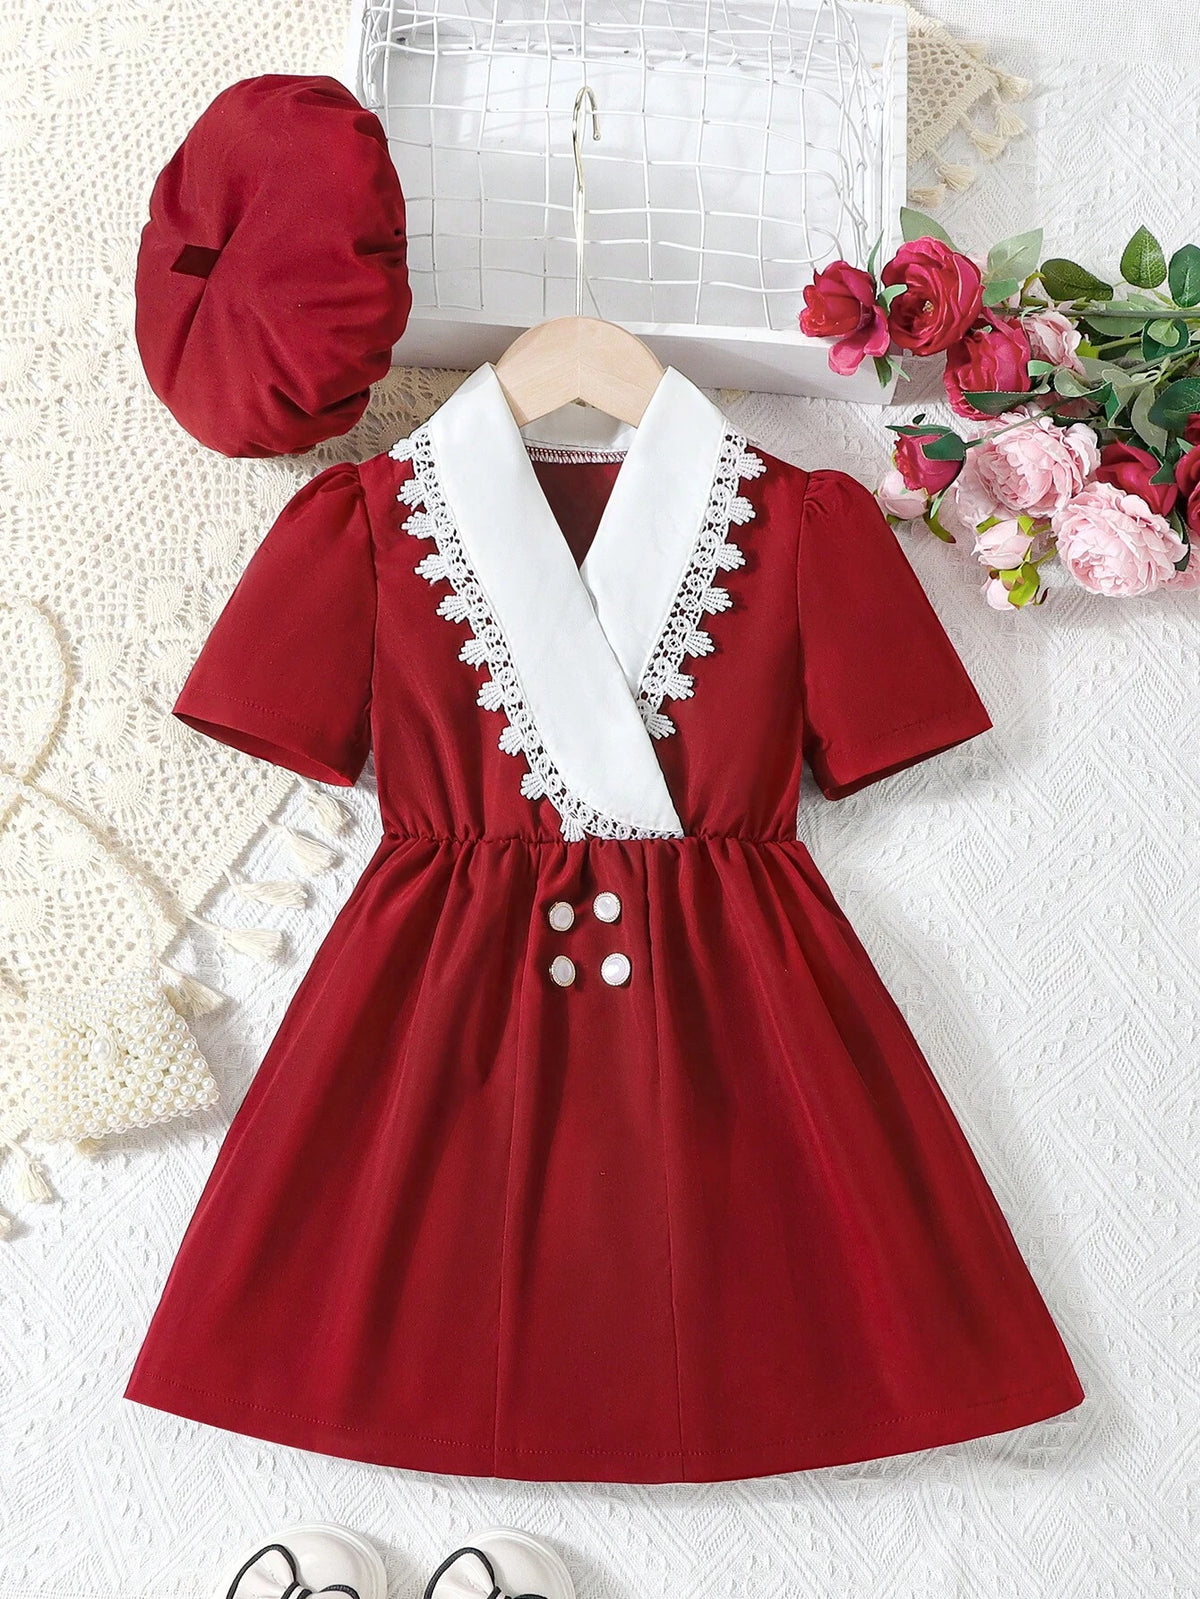 Young Girls' Elegant V-Neck Crossed Collar Lace Decor Mid-Calf Short Sleeve Dress And Beret, Suitable For Children's Evening Parties, Summer